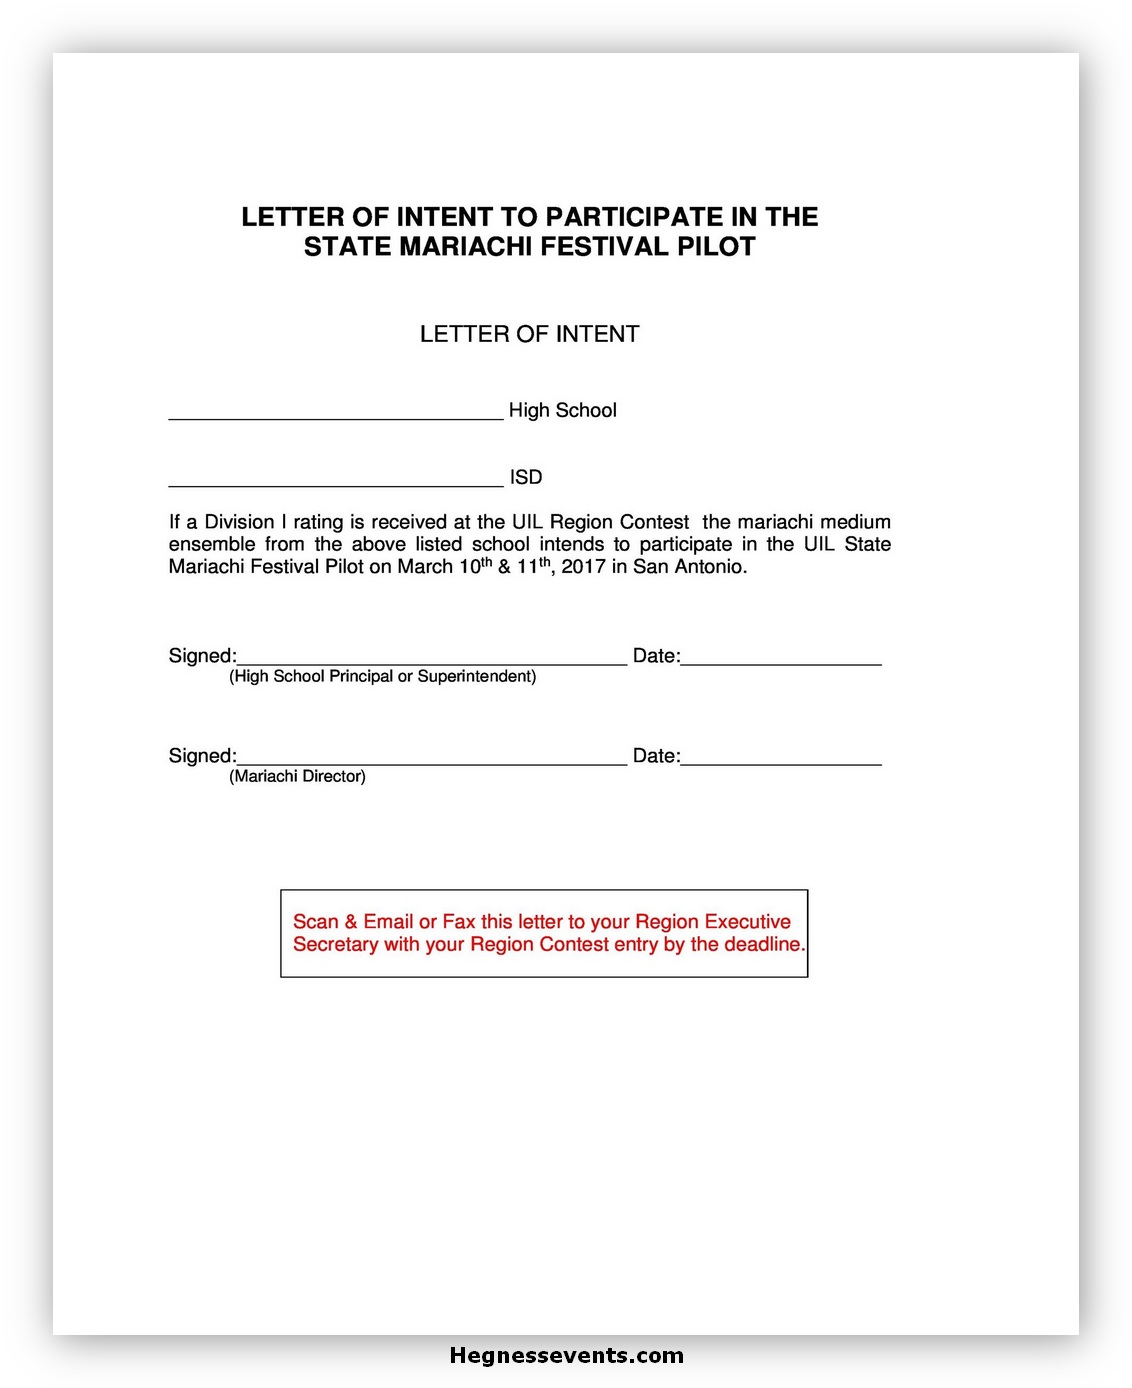 Letter of Intent Template 04